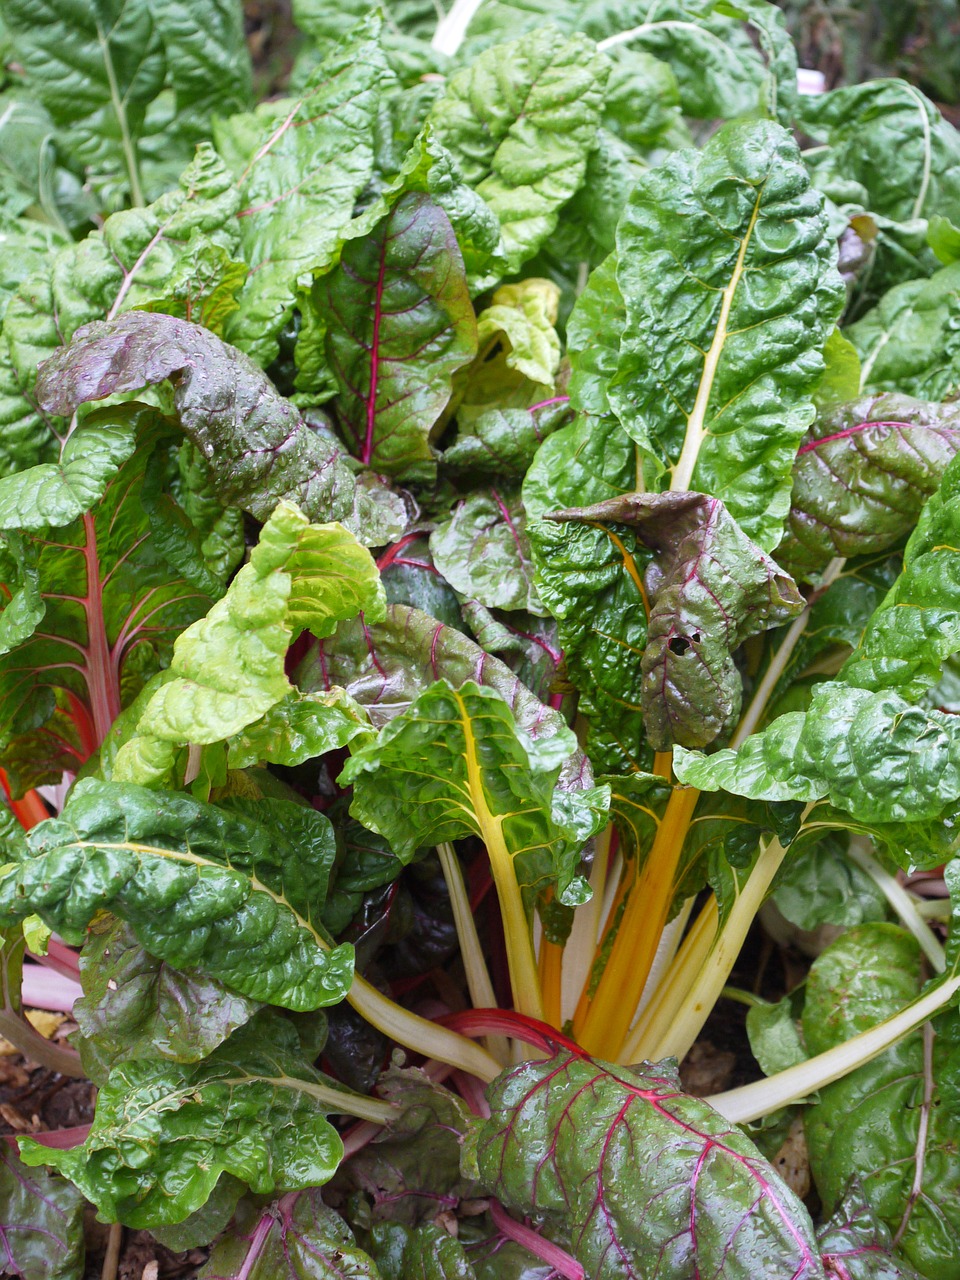 chard vegetable patch healthy free photo